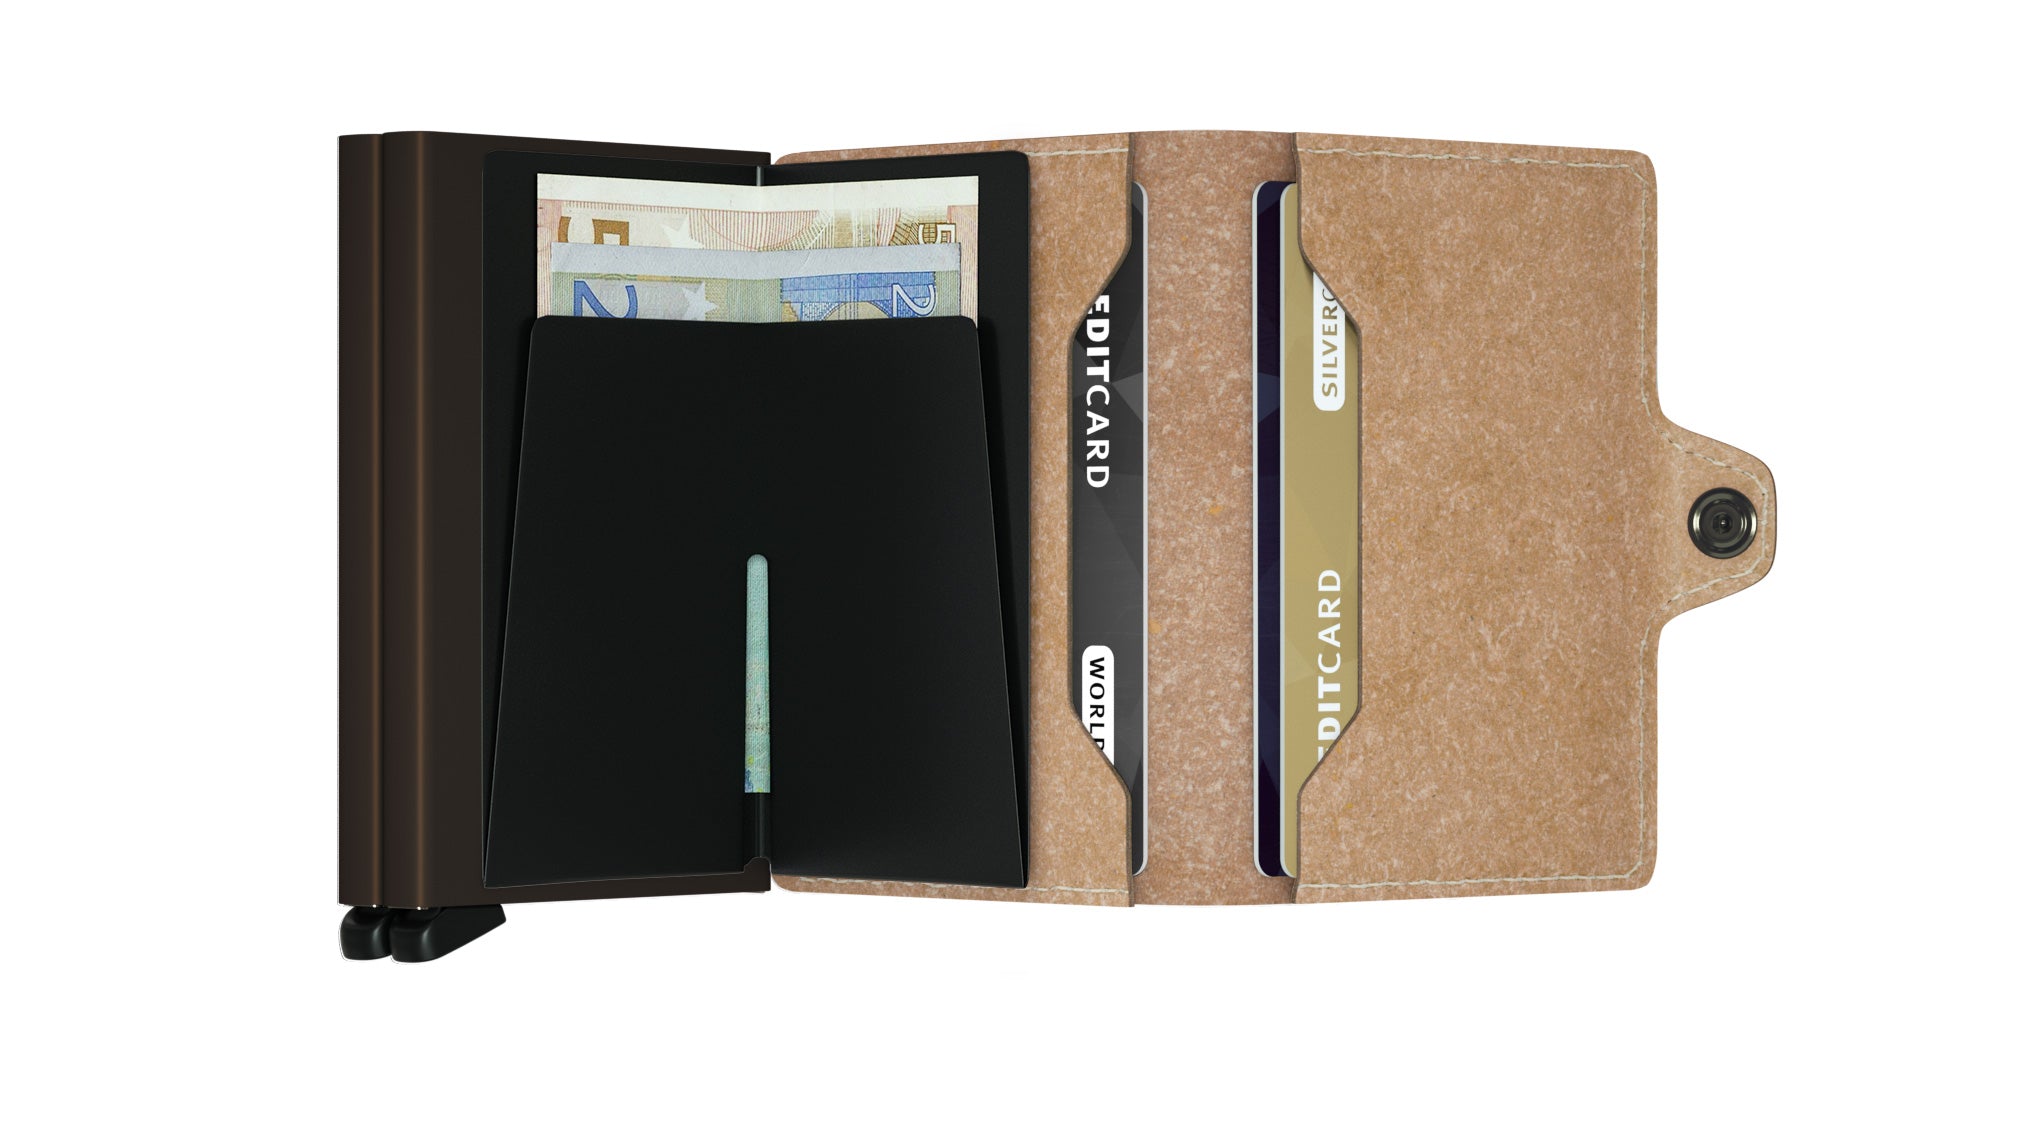 Secrid Twinwallet Recycled Natural